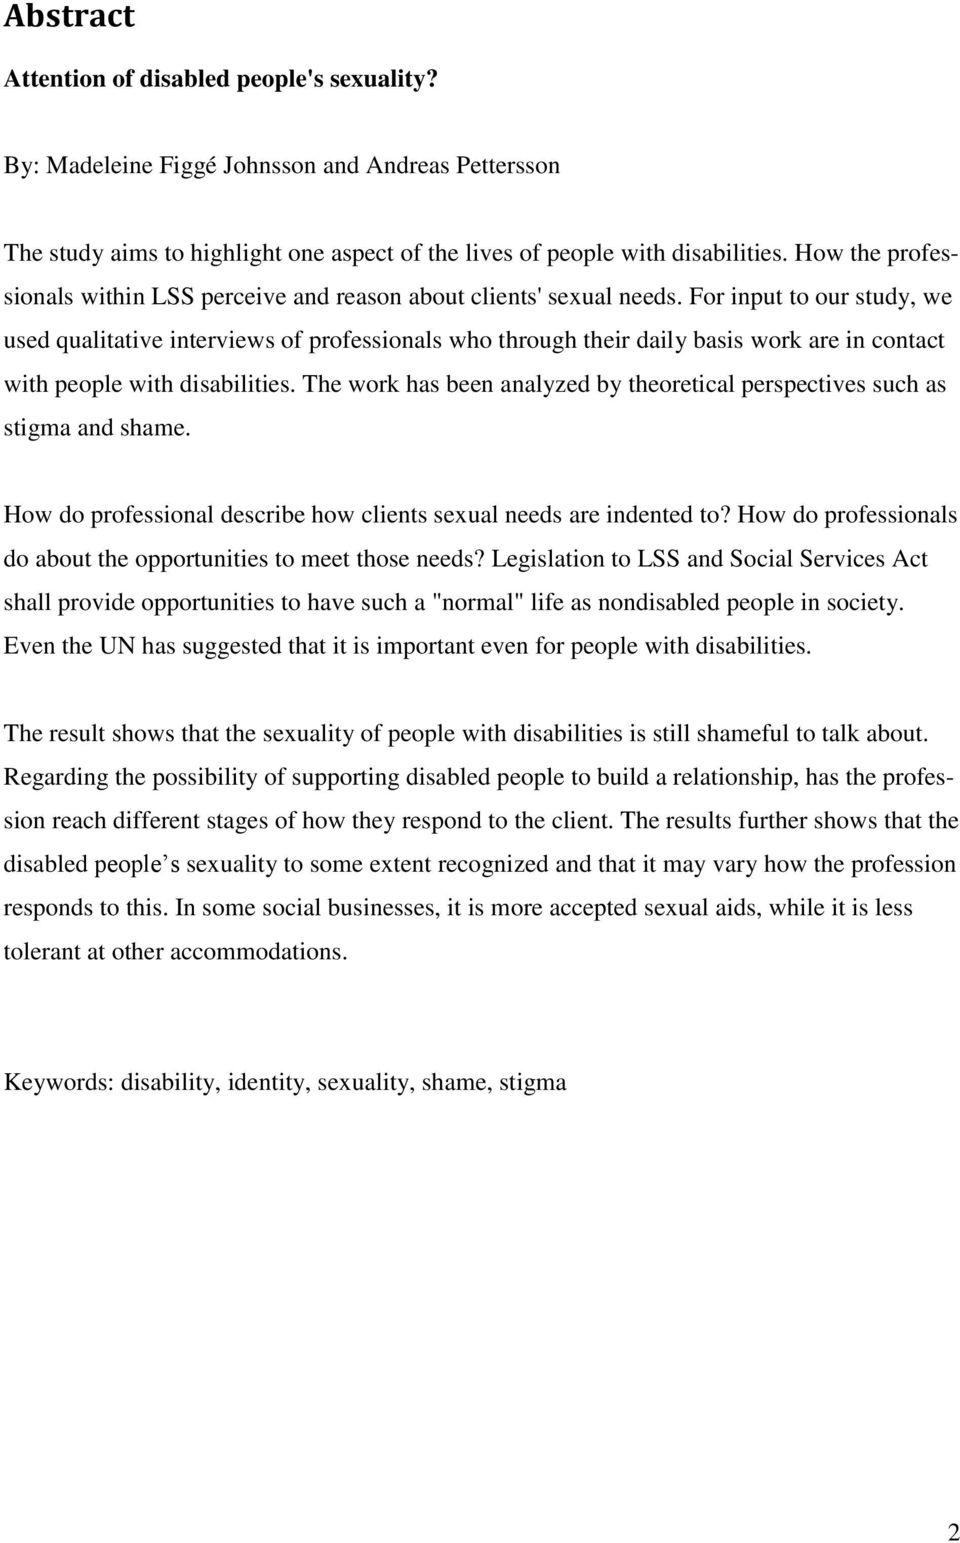 For input to our study, we used qualitative interviews of professionals who through their daily basis work are in contact with people with disabilities.